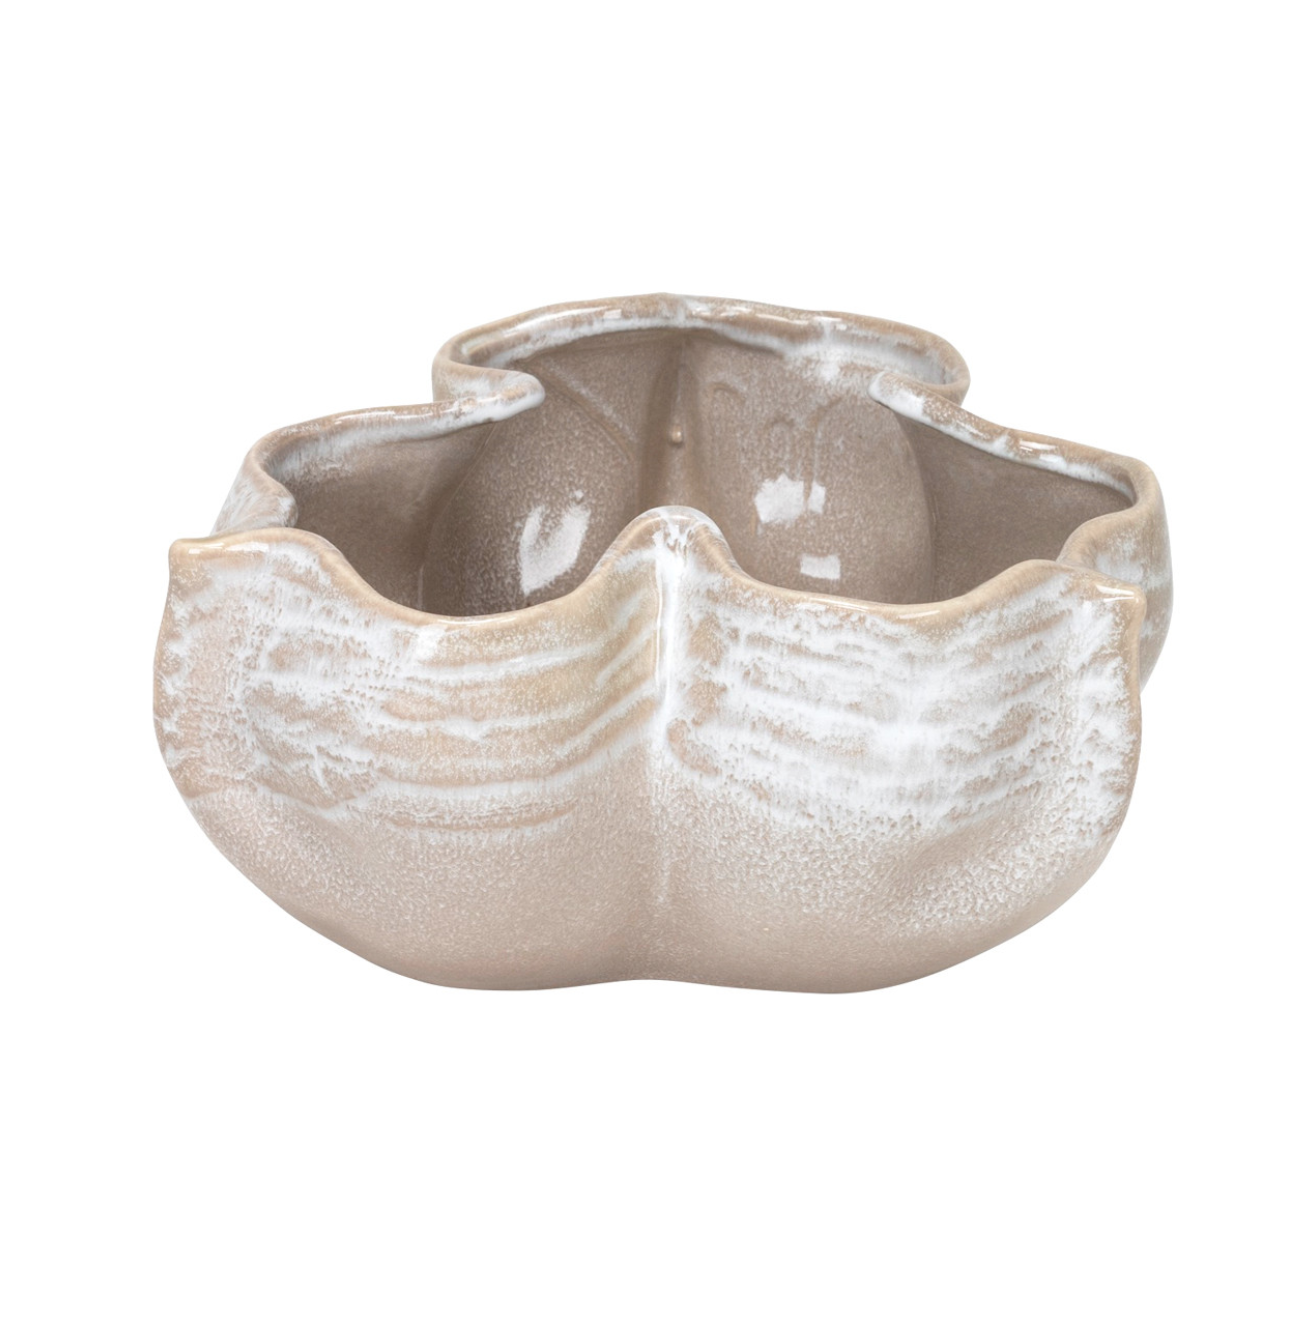 A Hadley Bowl from The Import Collection shaped like a flower with petal-like edges, in a neutral beige tone with textured white glaze on the rims, reminiscent of Scottsdale Arizona&#39;s desert hues, isolated on a white background.